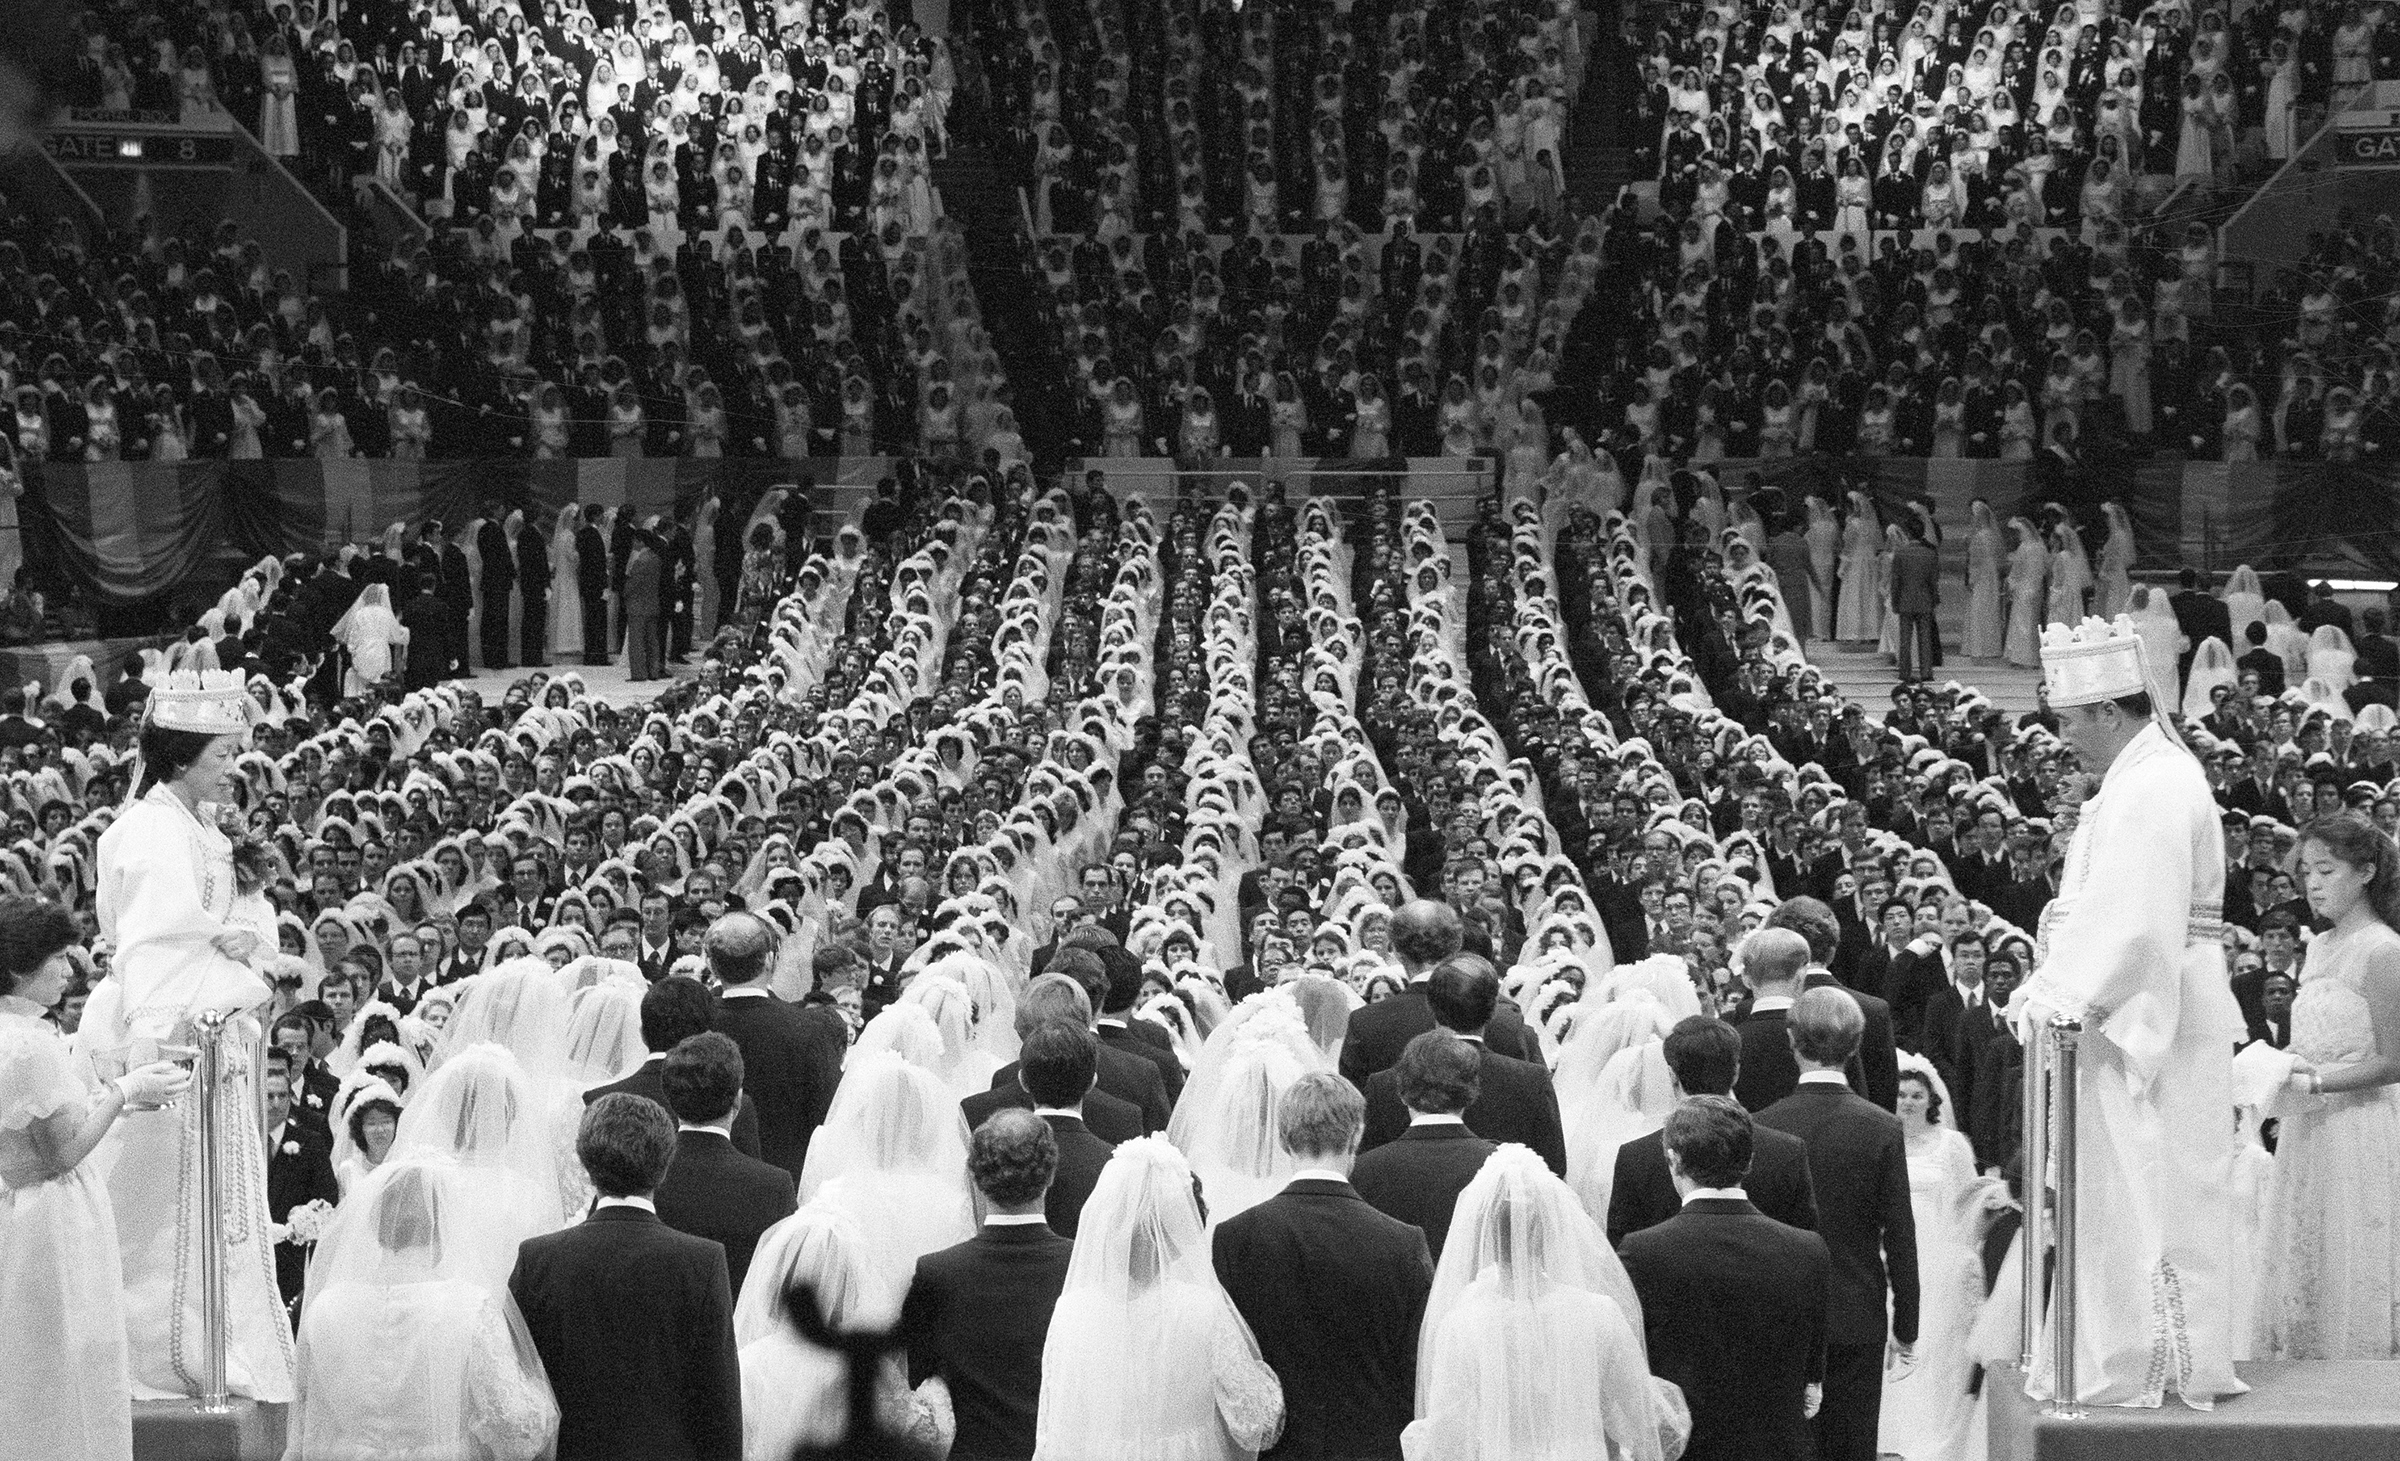 Unification Church leader Reverend Sun Myung Moon and his wife marry 2,075 pairs of his followers at Madison Square Garden on New Years Day, 1982.